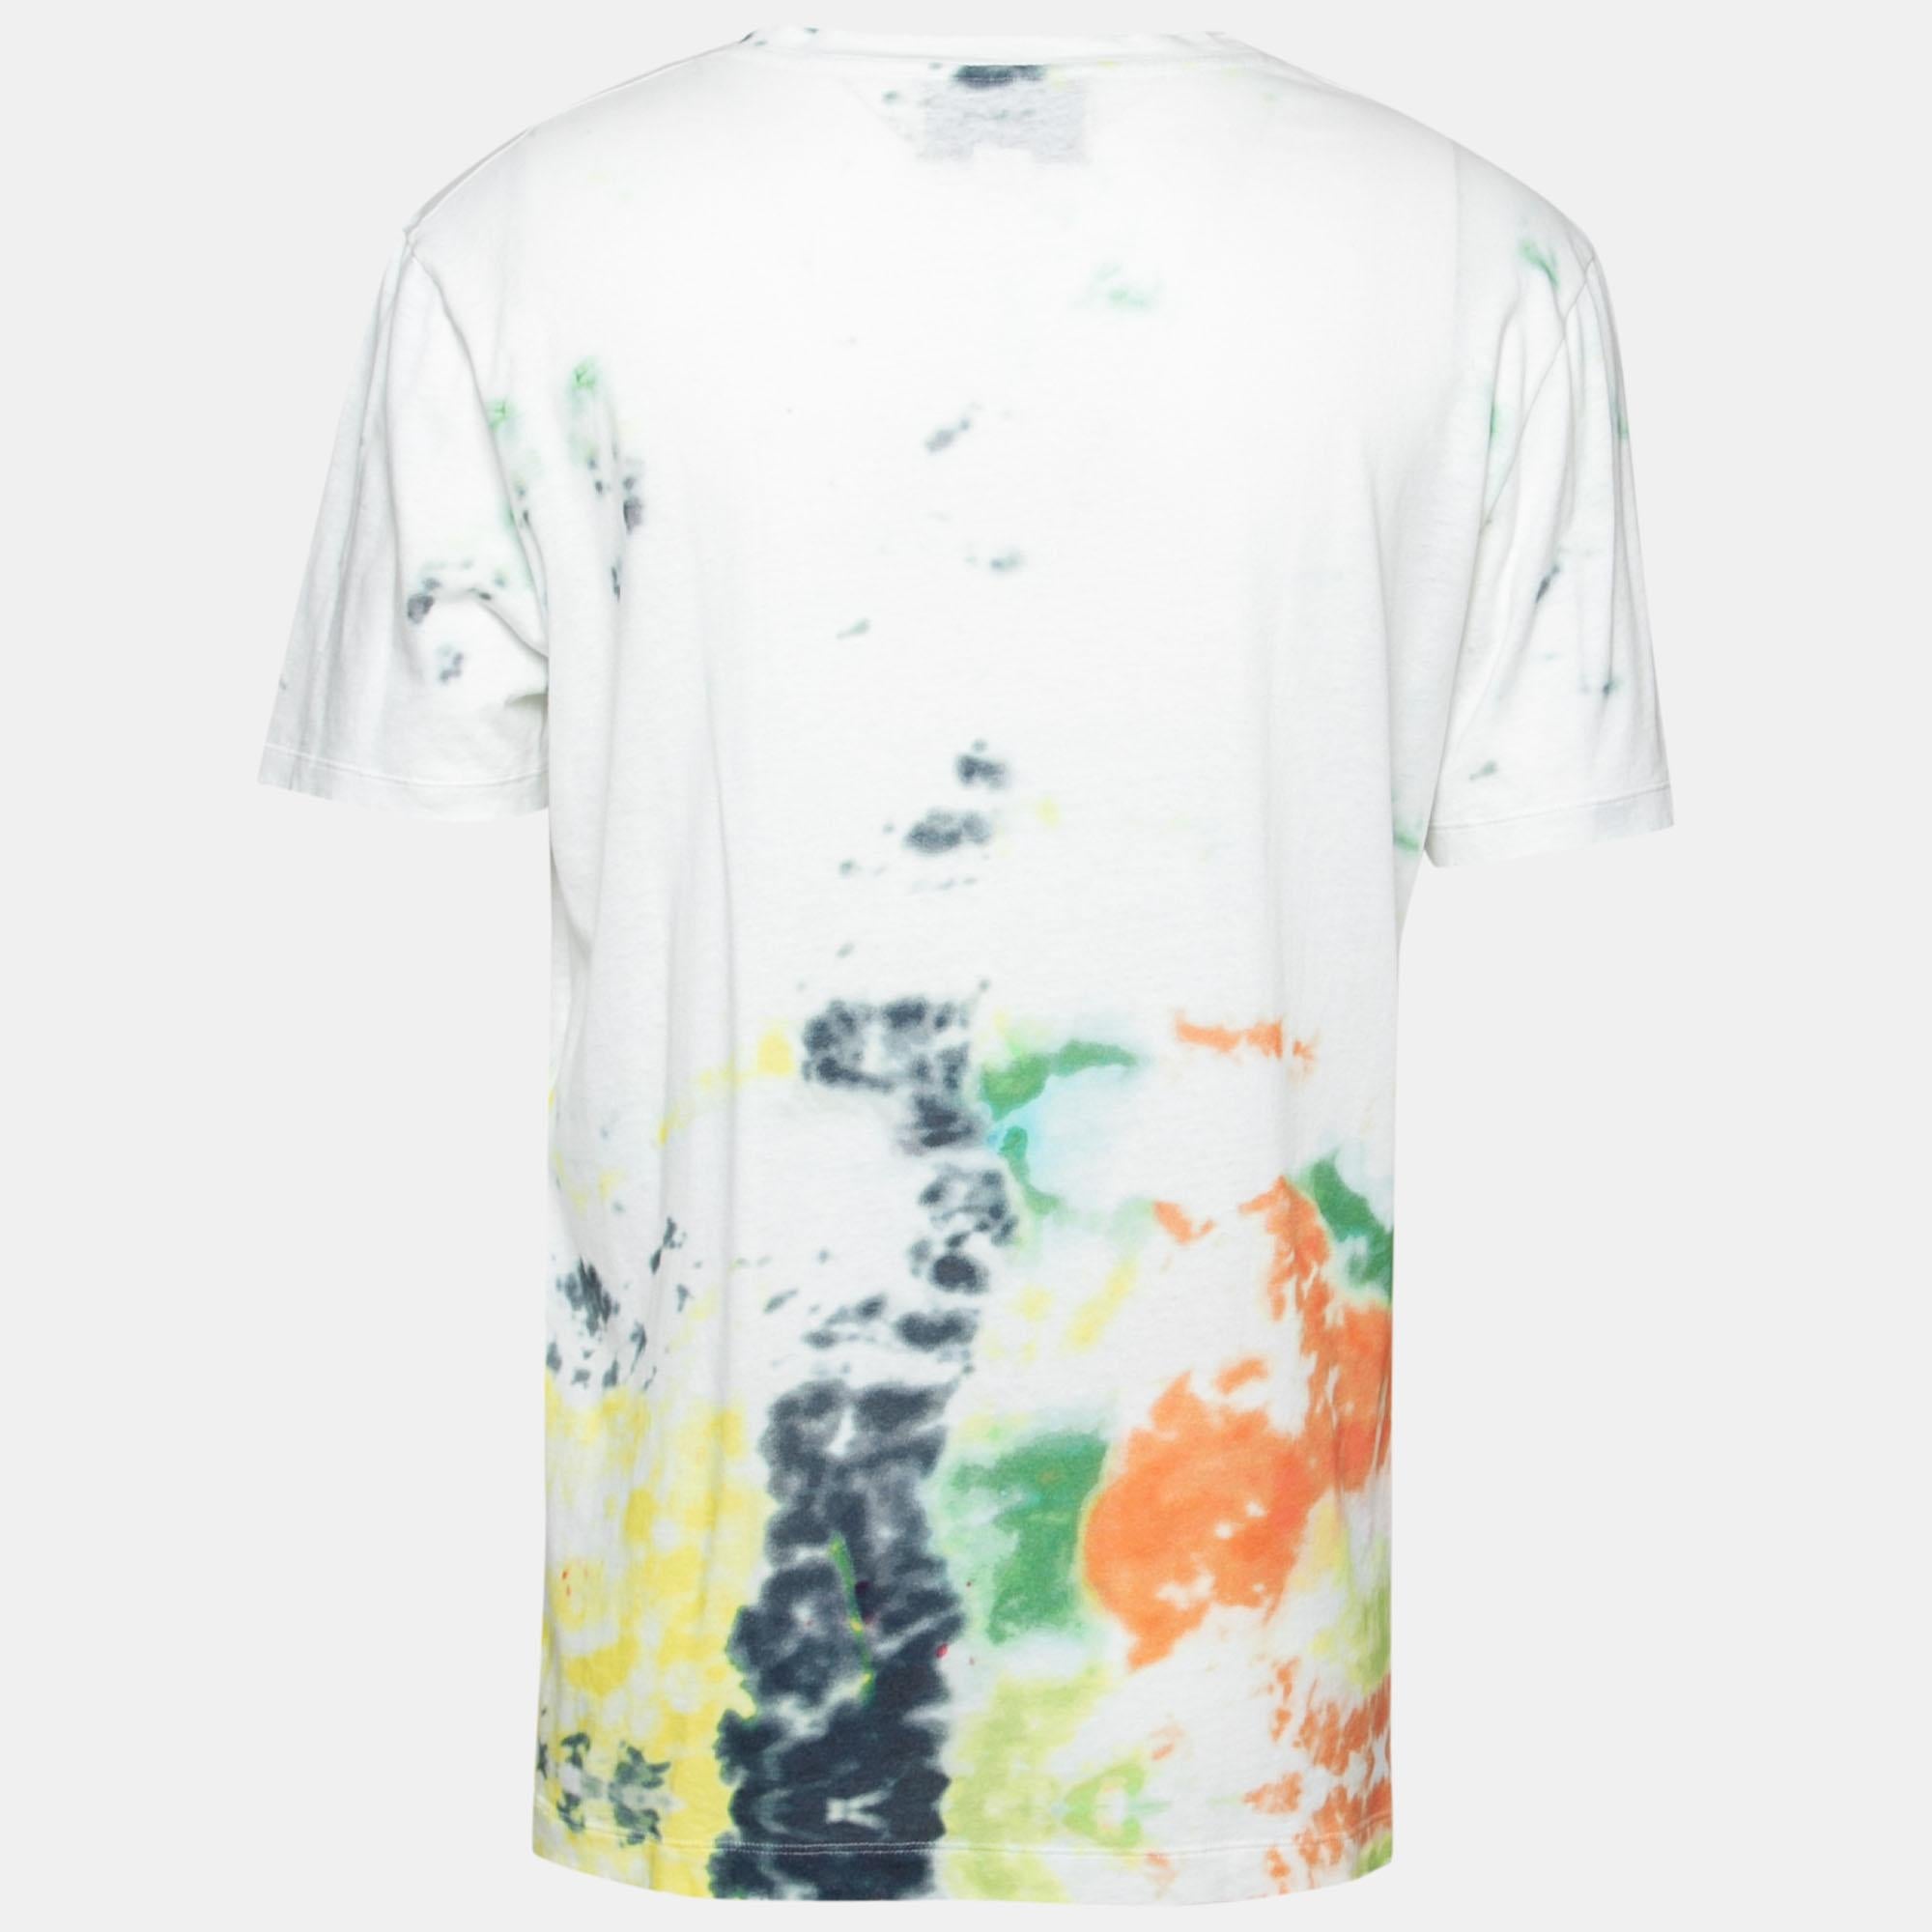 This T-shirt from the House of Gucci is all about sporting a classy and comfy style. It is tailored from white cotton fabric, which is elevated with tie-dye prints and logo detail. It displays short sleeves. This Gucci T-shirt is great for casual